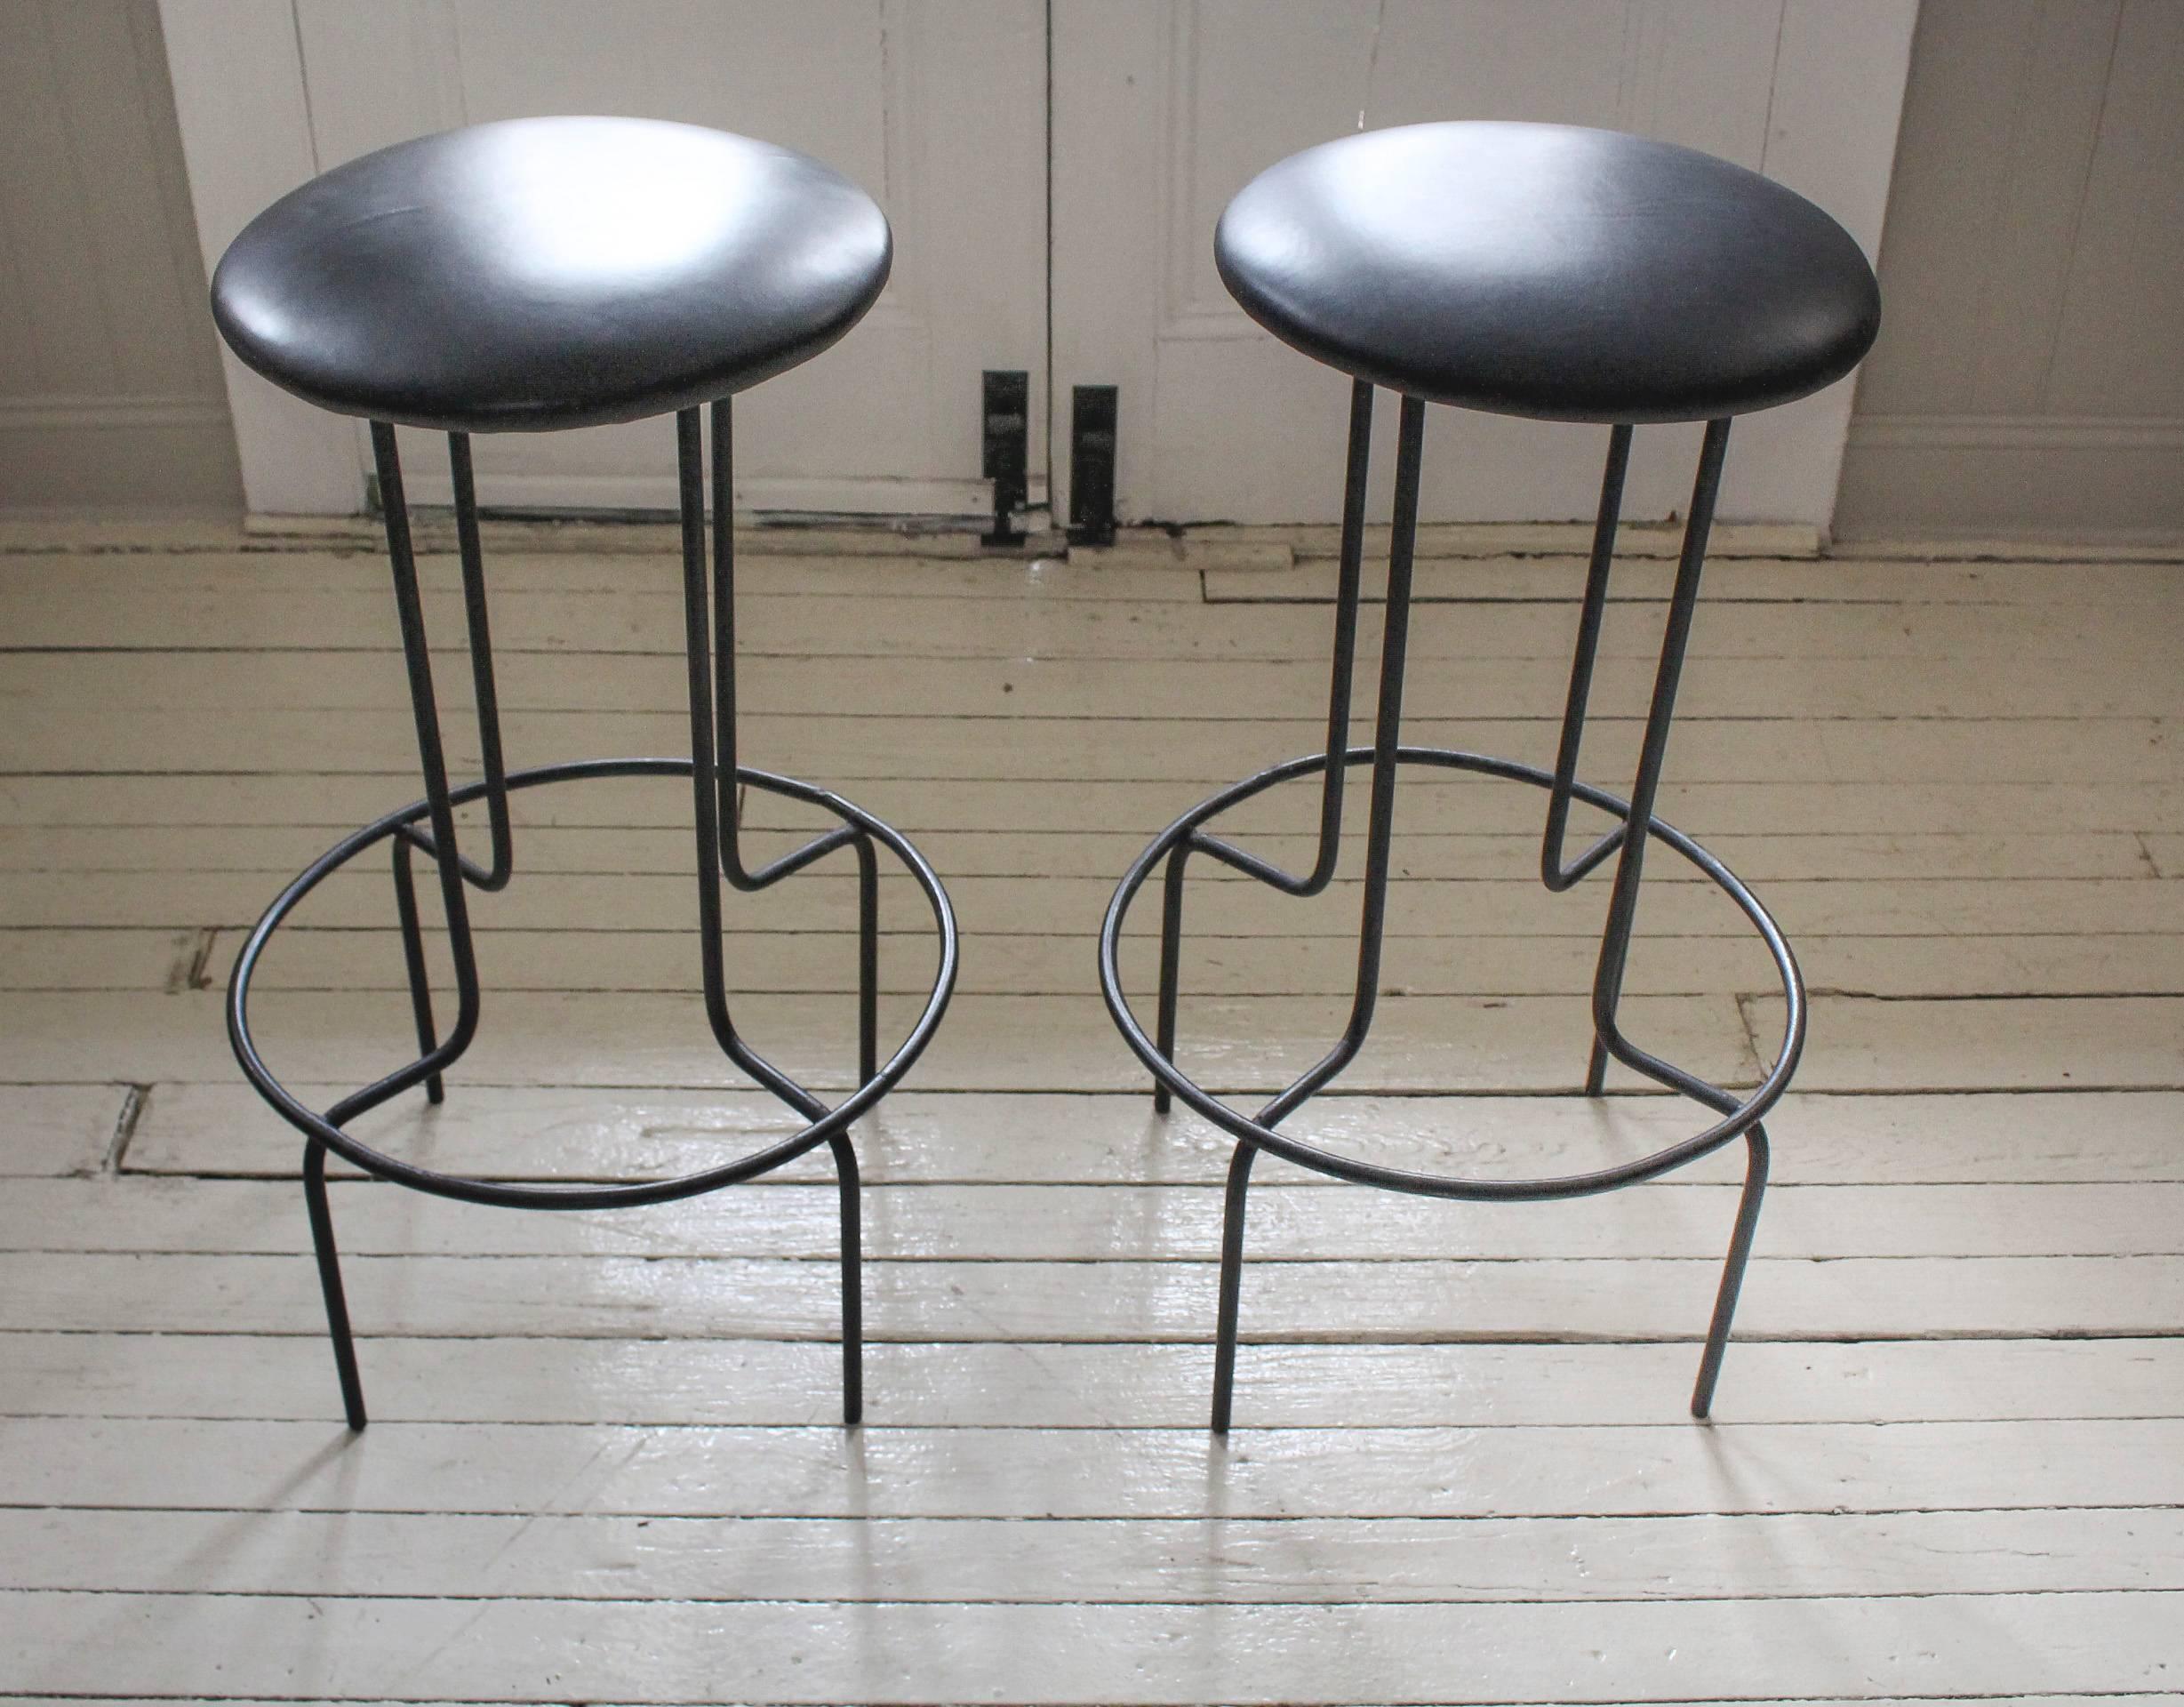 Pair of iron bar-height stools, 1950s USA, with footrest. Newly upholstered black leather seats. Manufacturer's original label is still intact and attached; it reads 